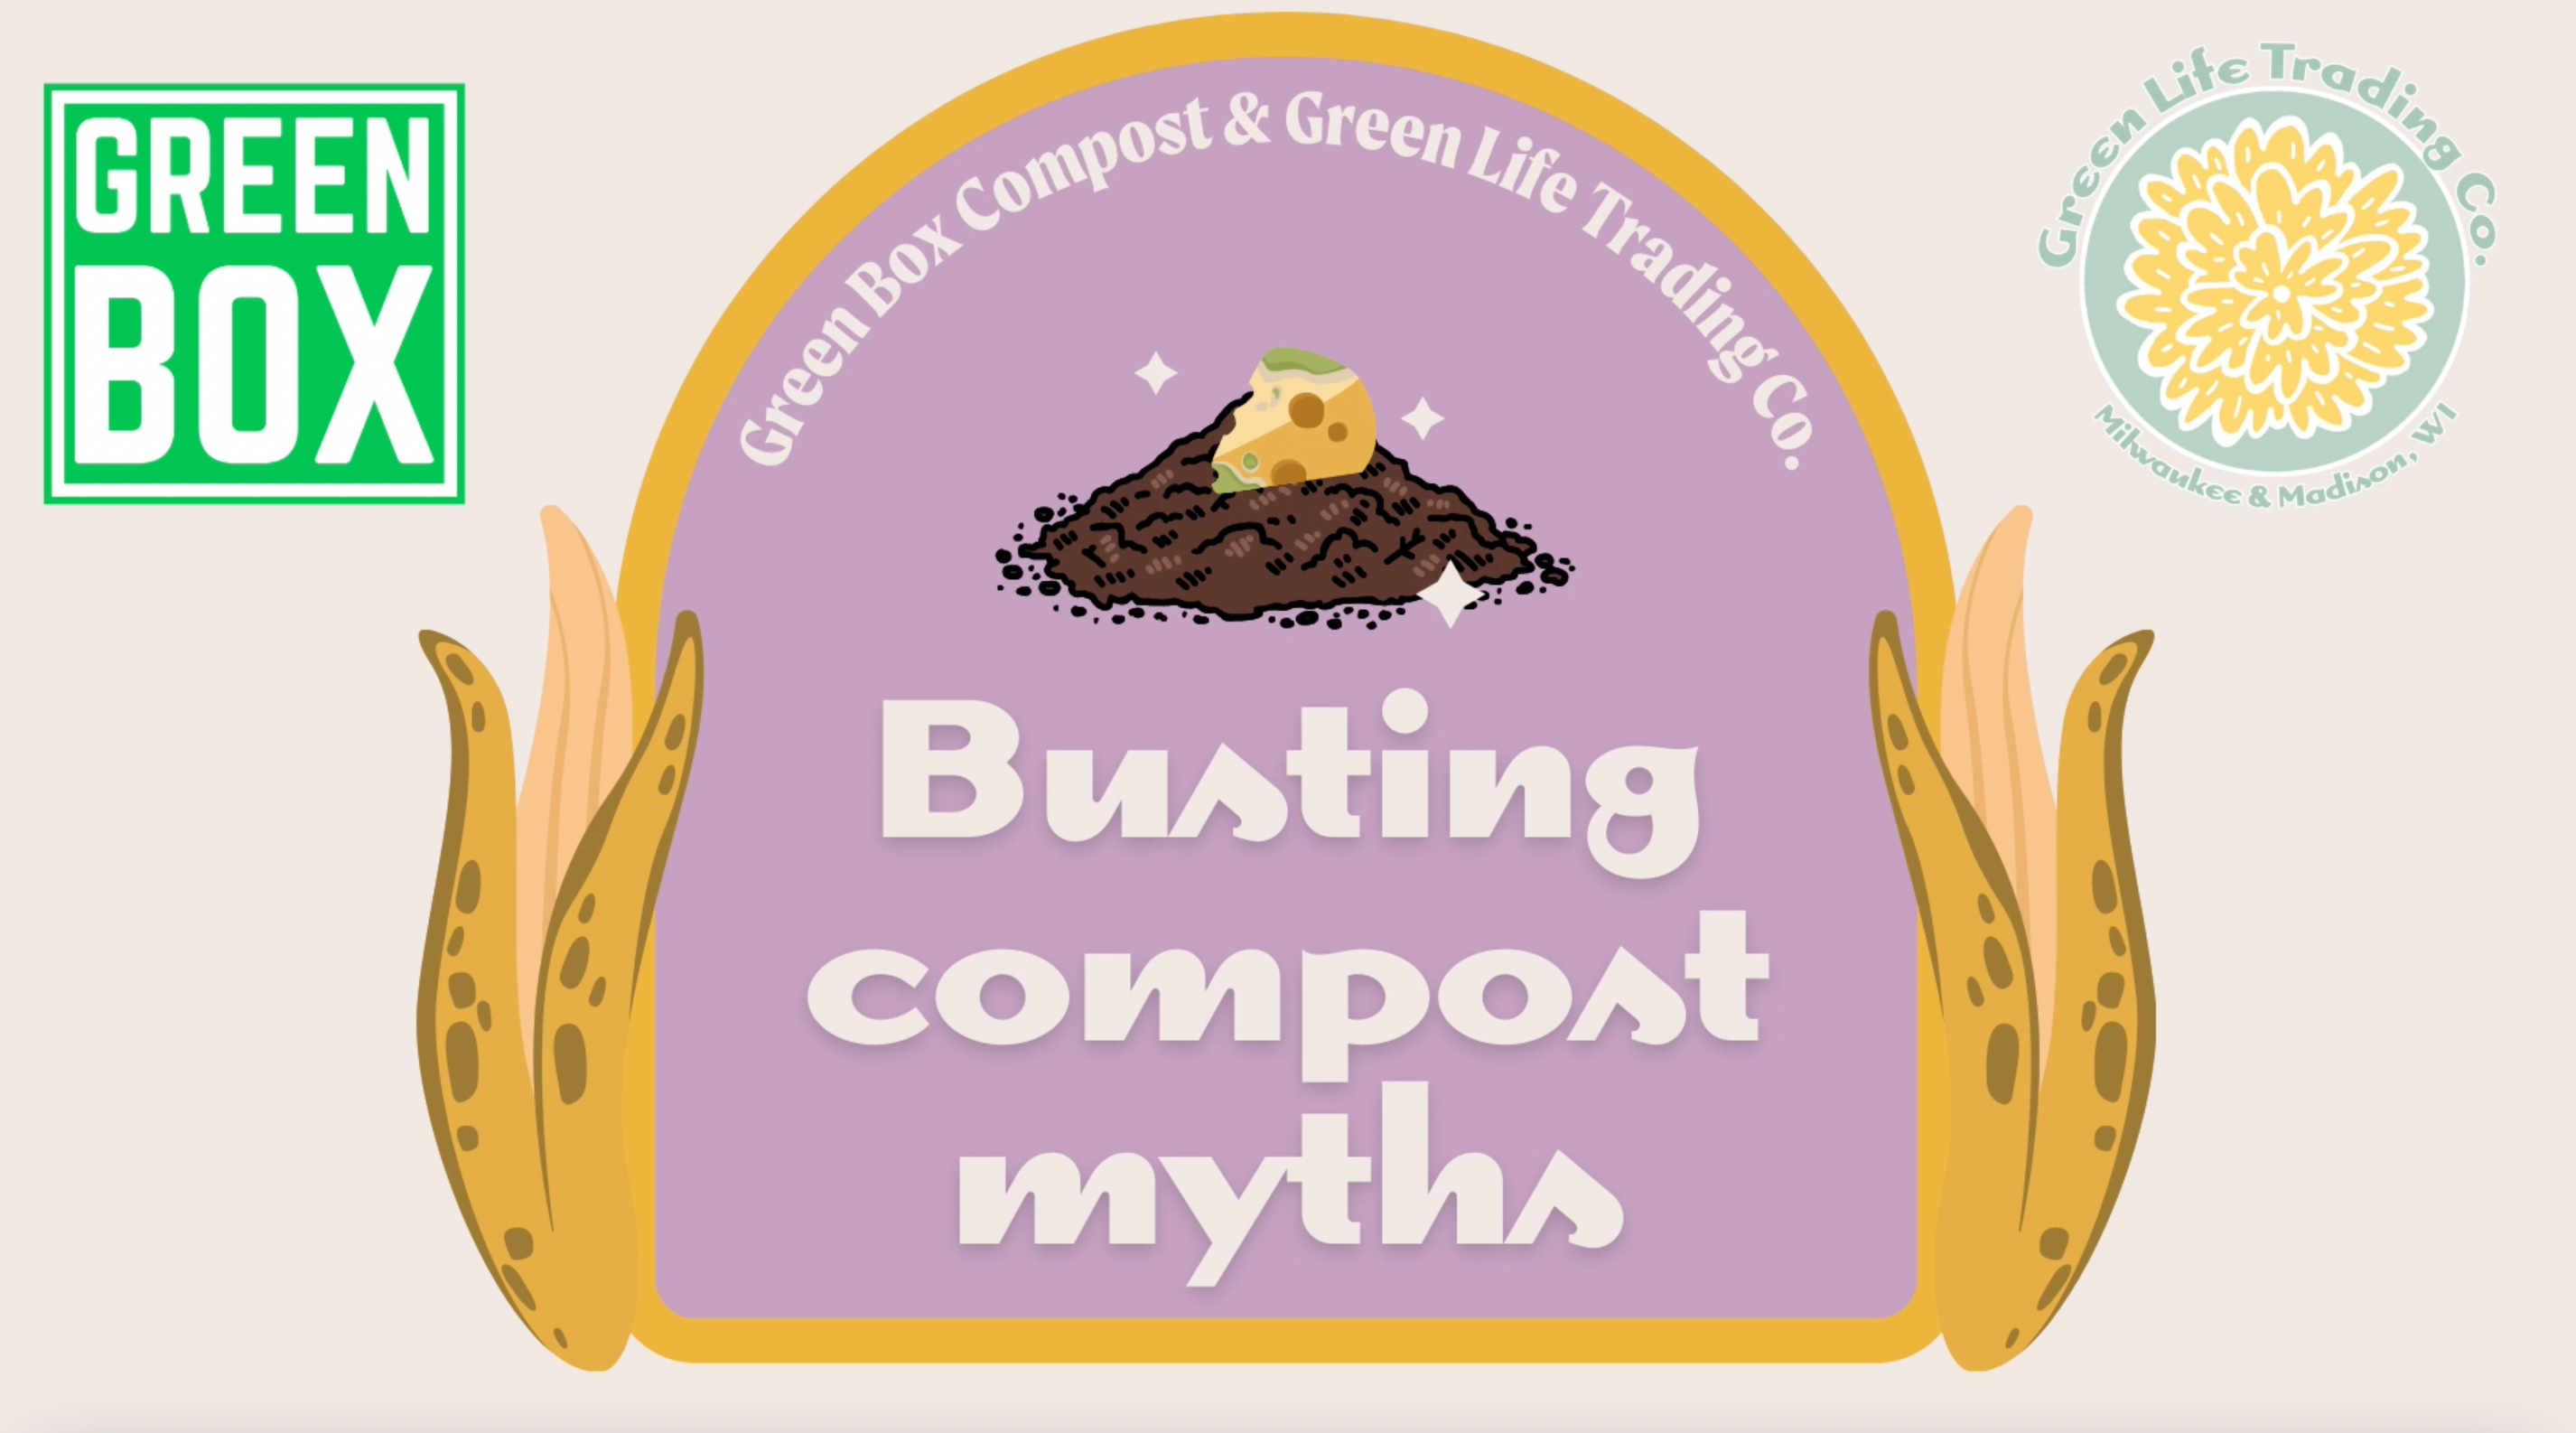 Load video: Busting common composting myths with the pros!